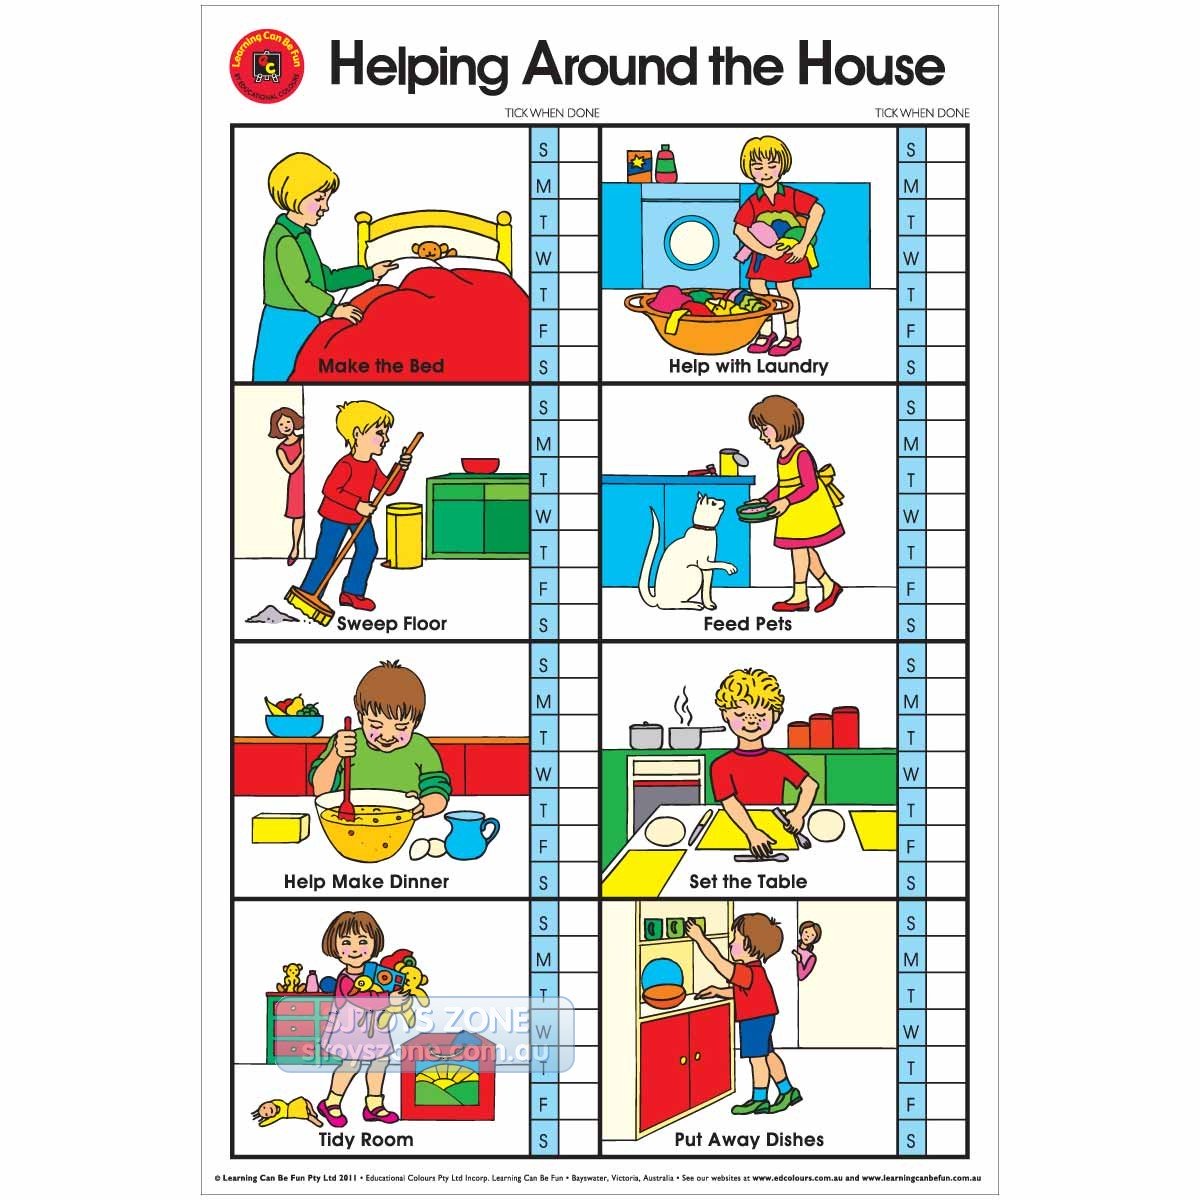 Learning Can Be Fun - Helping Around the House - Wall Chart